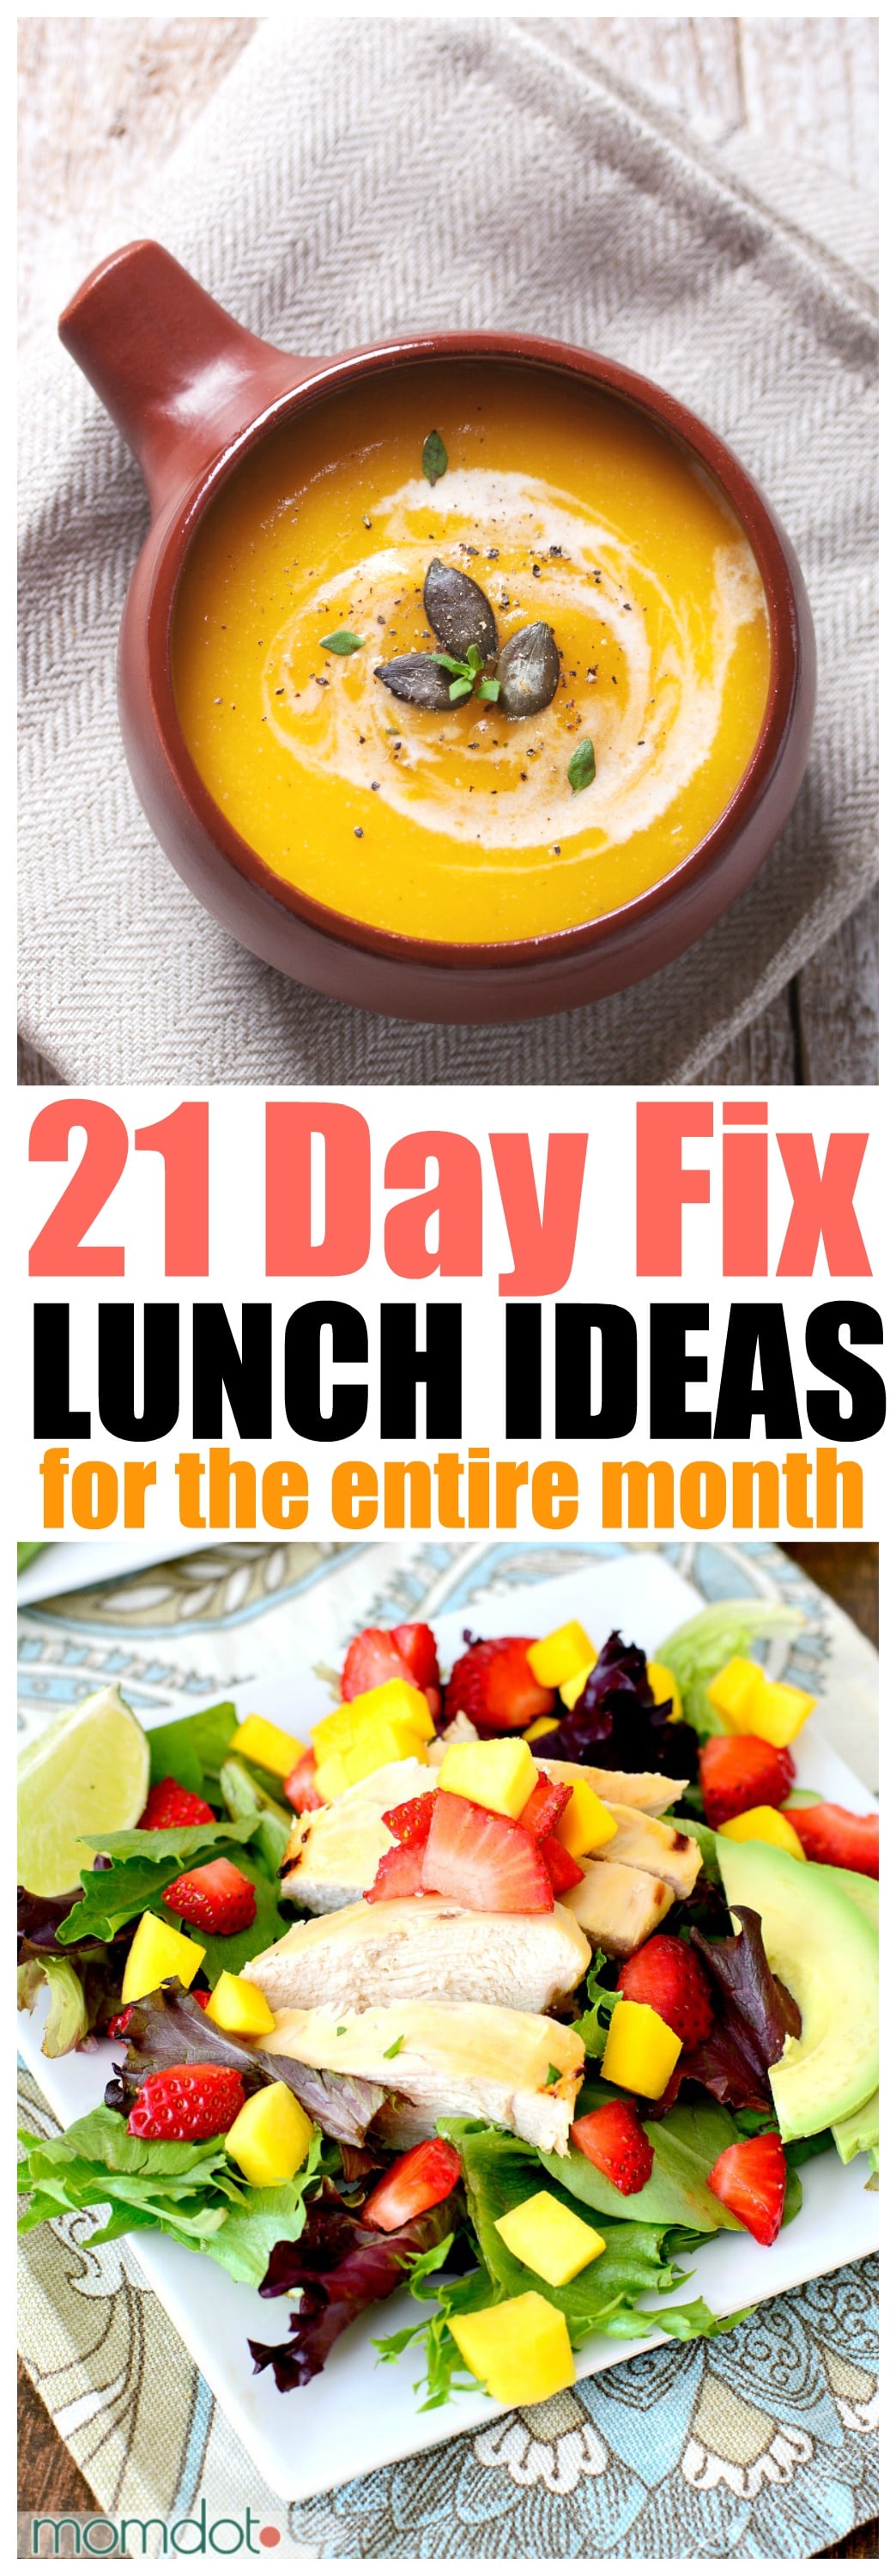 21-Day Fix Lunch Recipes, Lunch ideas for the entire month - chicken, beef, vegetarian and more